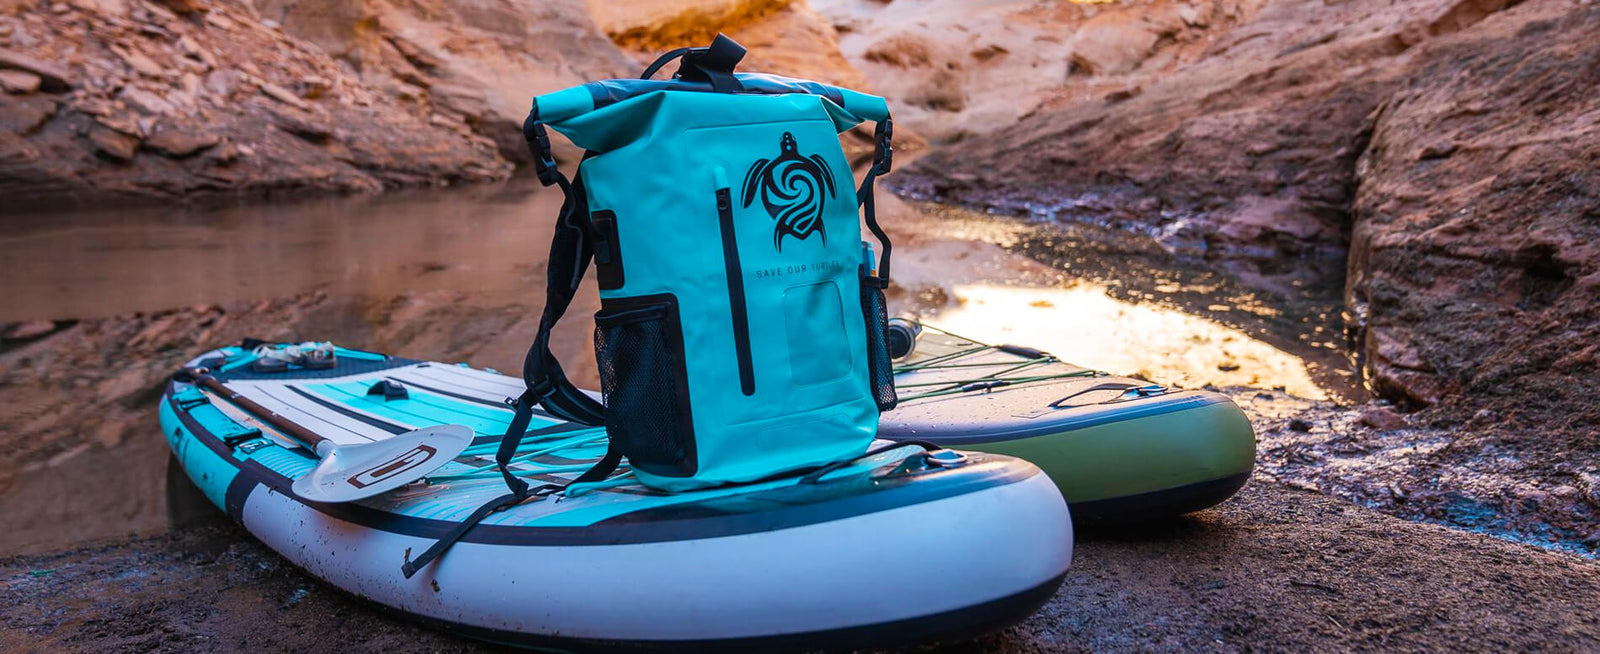 Best Dry Bags for Paddle Boarding